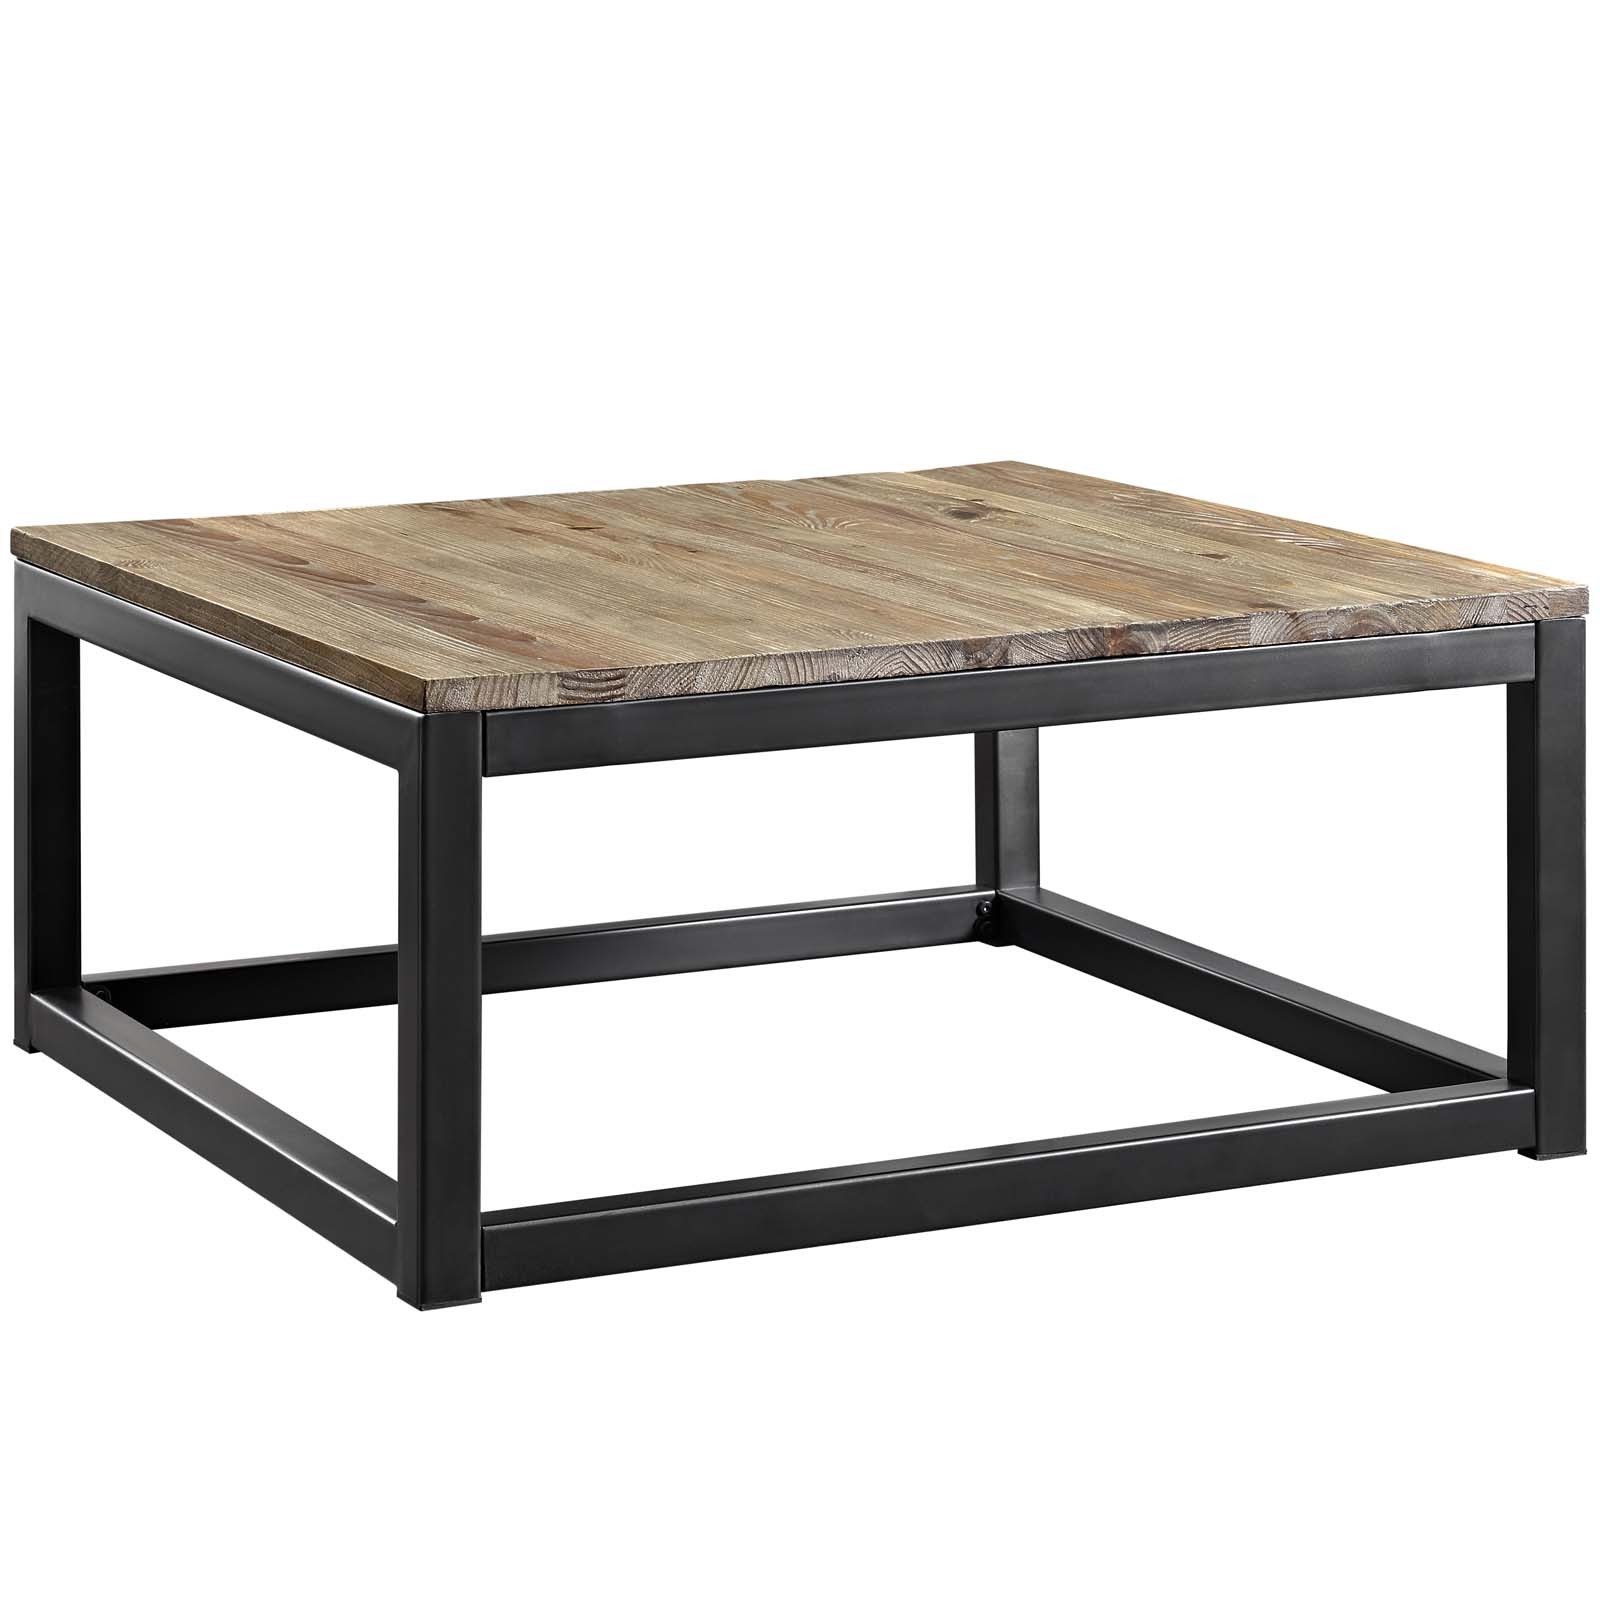 Attune Coffee Table in Brown